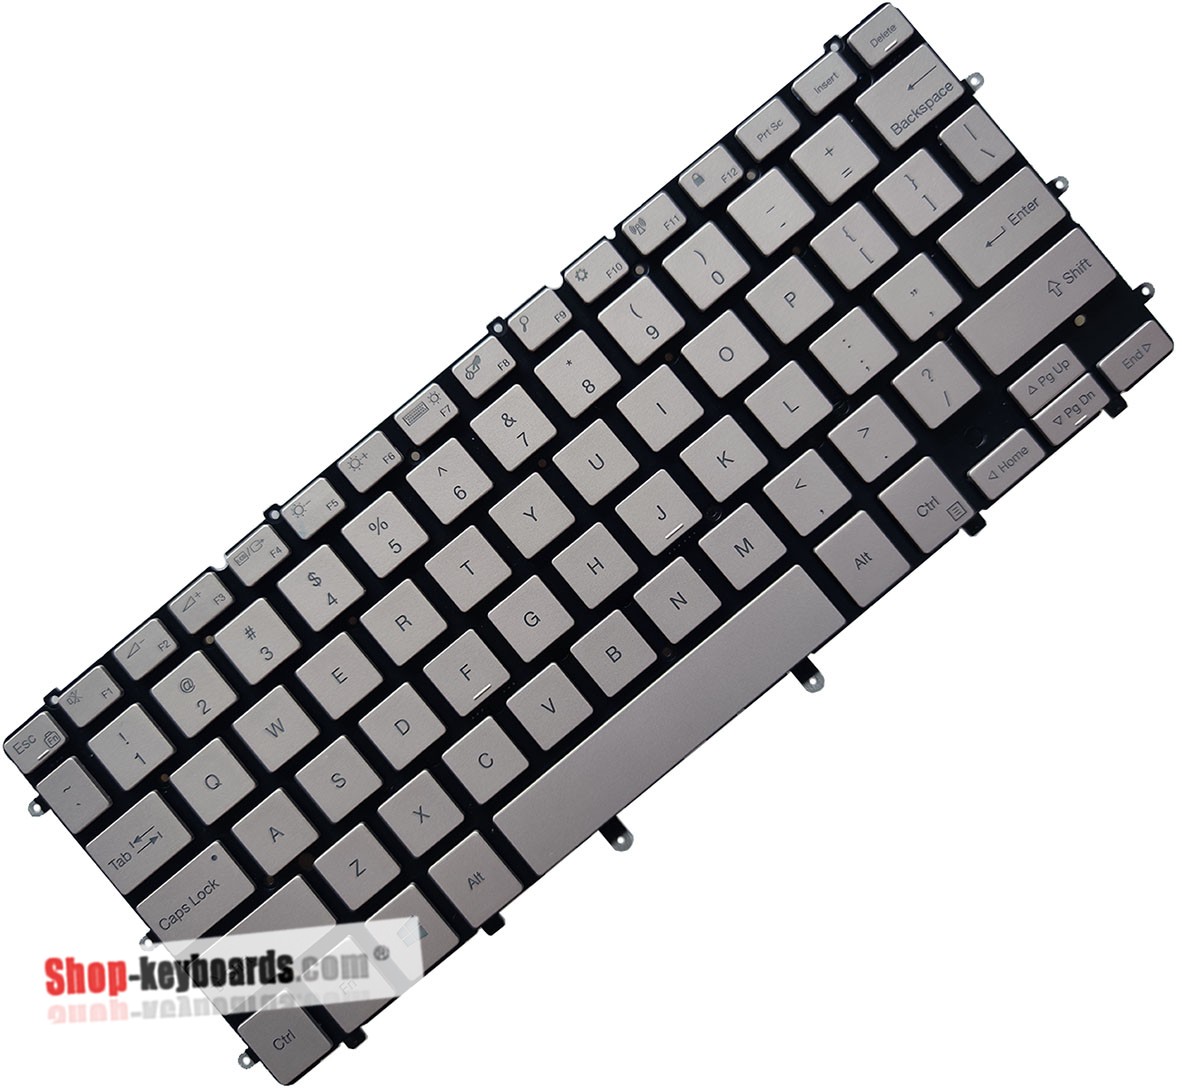 QUANTA AETX7Y00020 Keyboard replacement